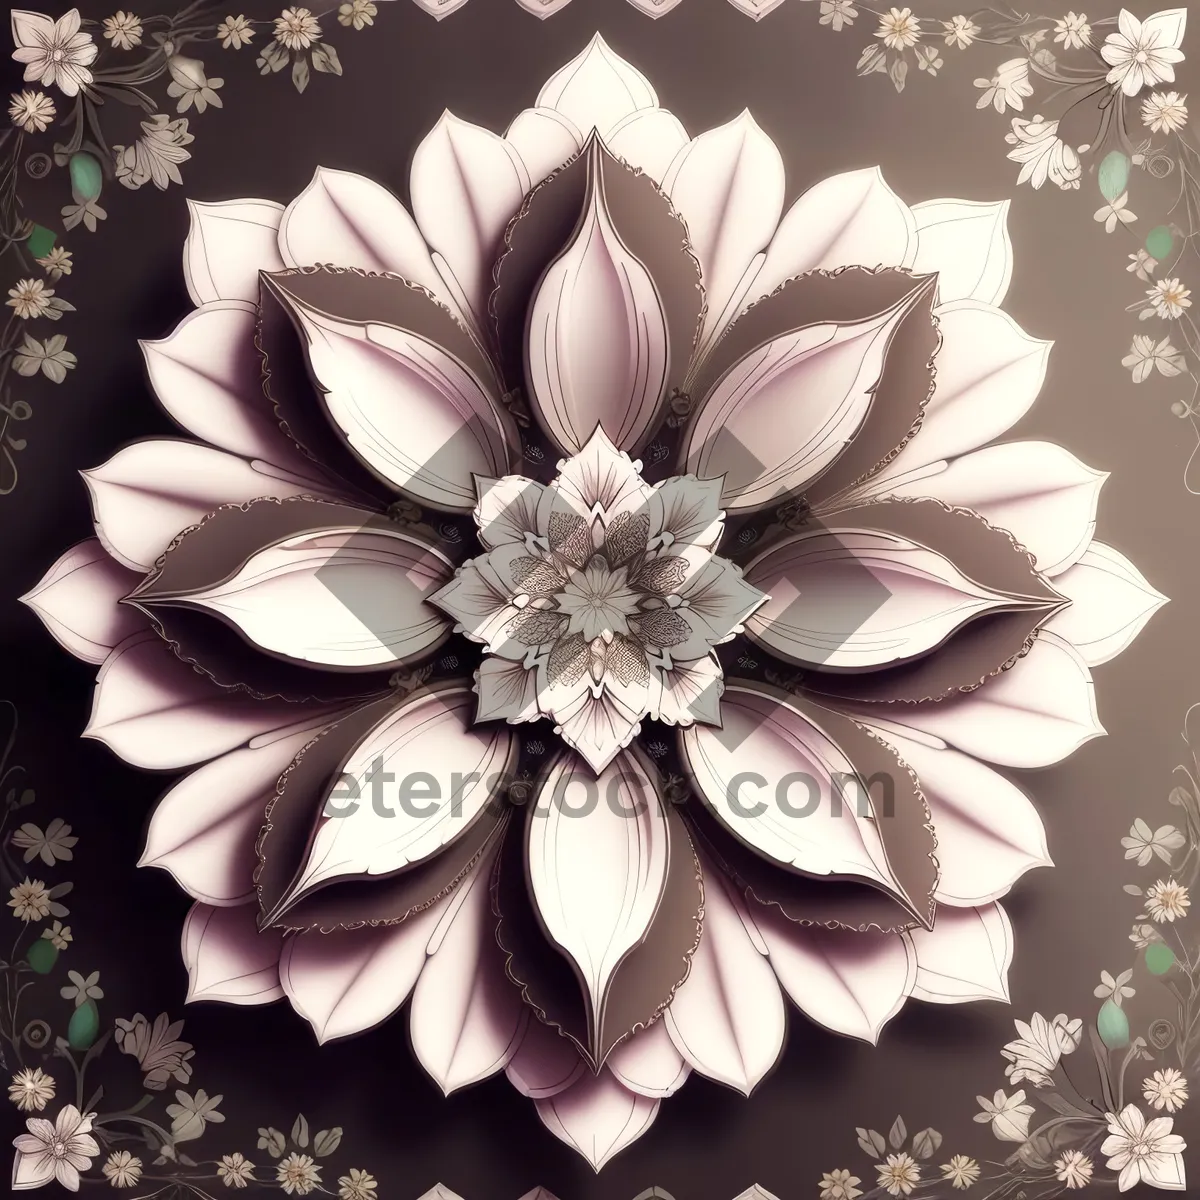 Picture of Vintage Floral Damask Pattern with Pink Lotus